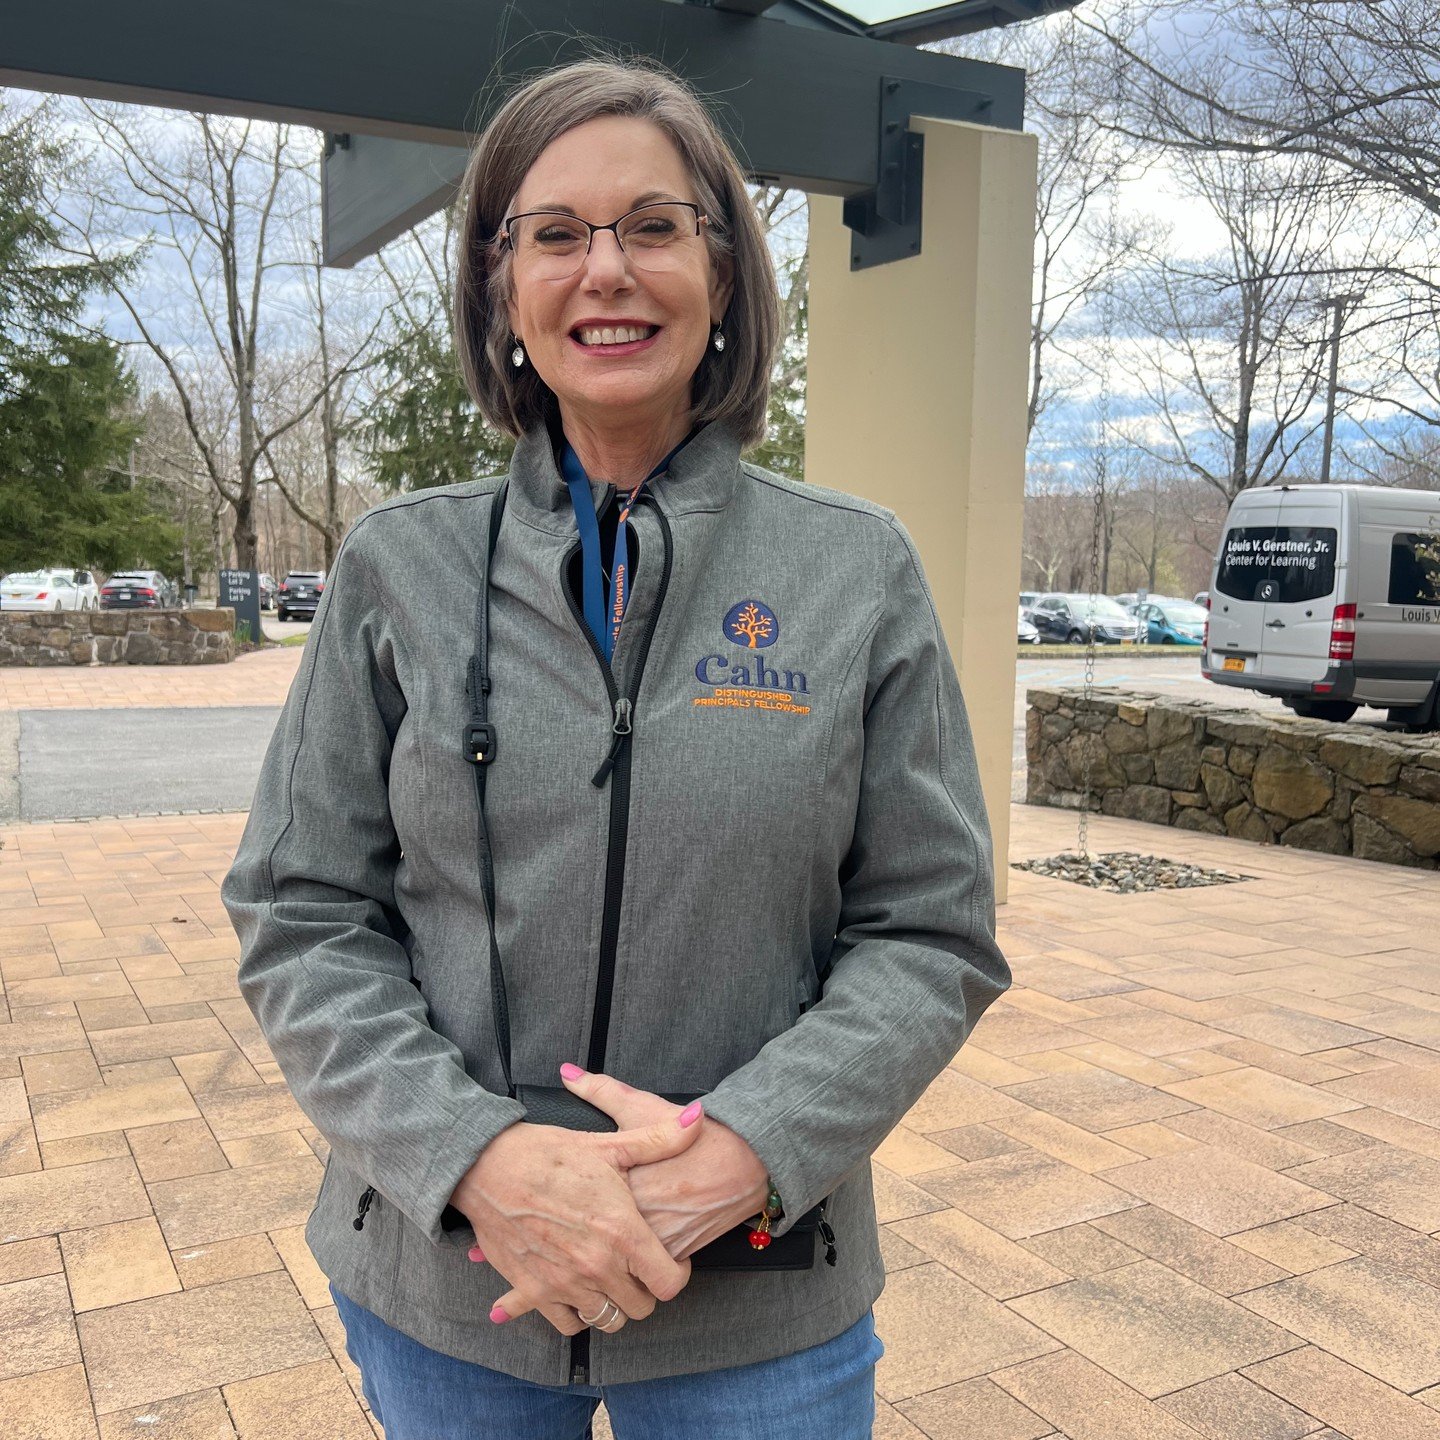 Did you know we have an online store? Meet Dr. Kelly Allen from San Antonio, Texas, rocking our Cahn merchandise with style! Check out our store for a range of products. #transformative21 https://versatees.com/cahnfellows/shop/home